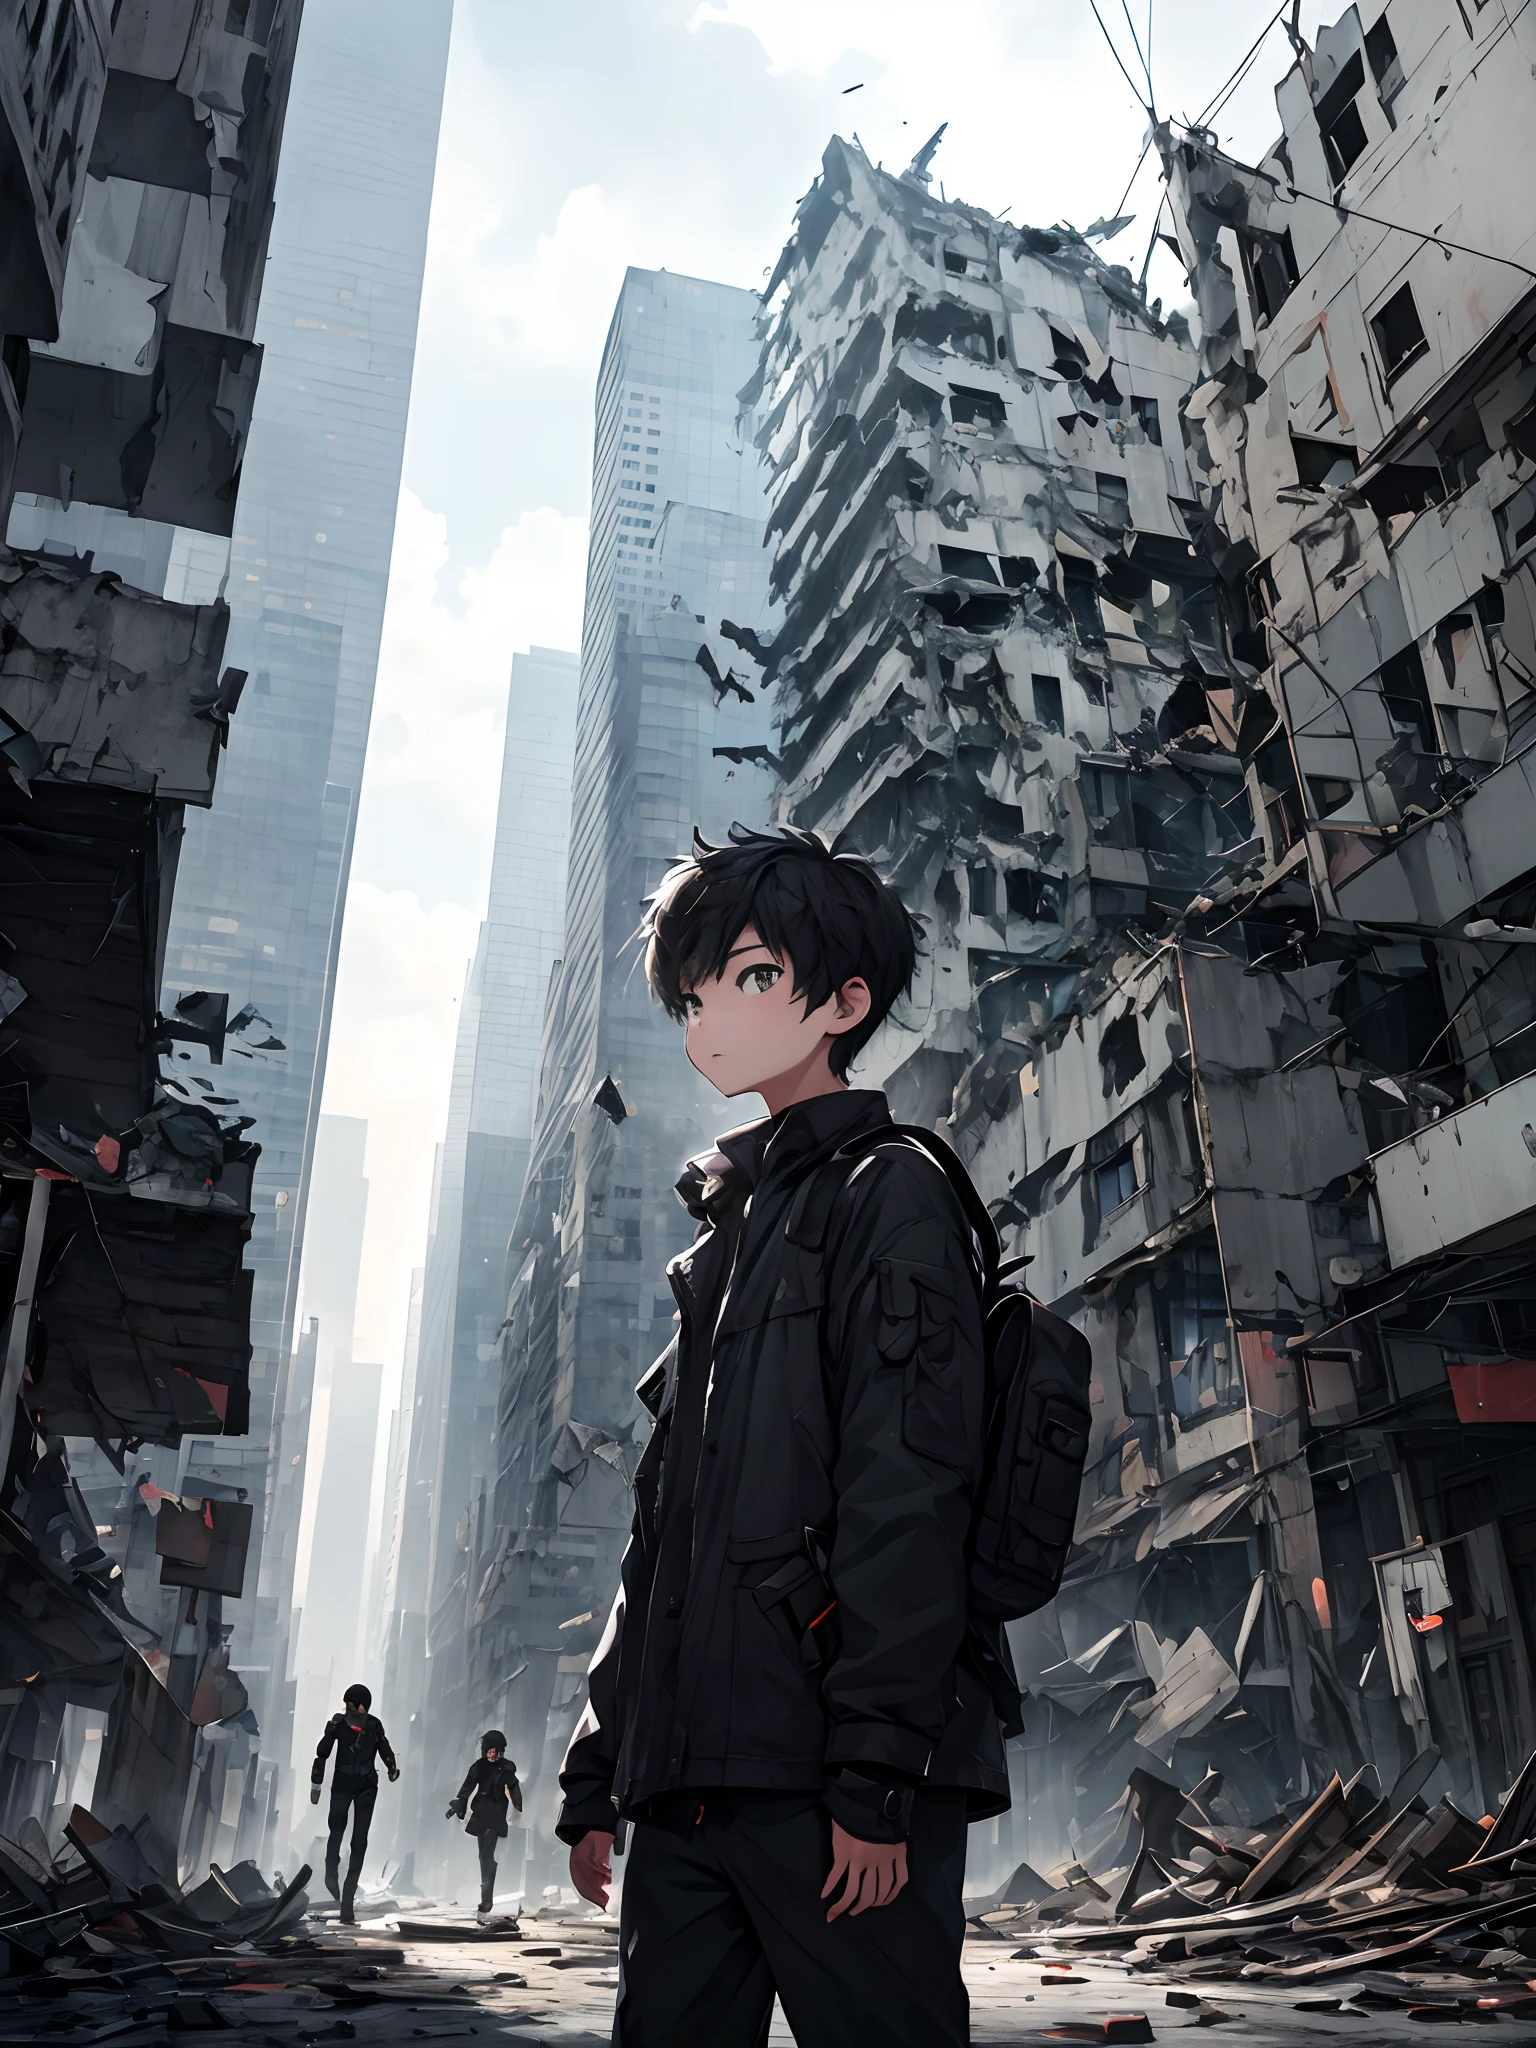 1 Close-up of a boy, The upper part of the body, Destroyed city、Abandoned skyscrapers
With a brave look、Boy guiding you to your destination。
Behind him is a gray sky and a broken wall、Remains of buildings。
With dynamic angles、Excellent drawing of strategic shadows。​masterpiece。